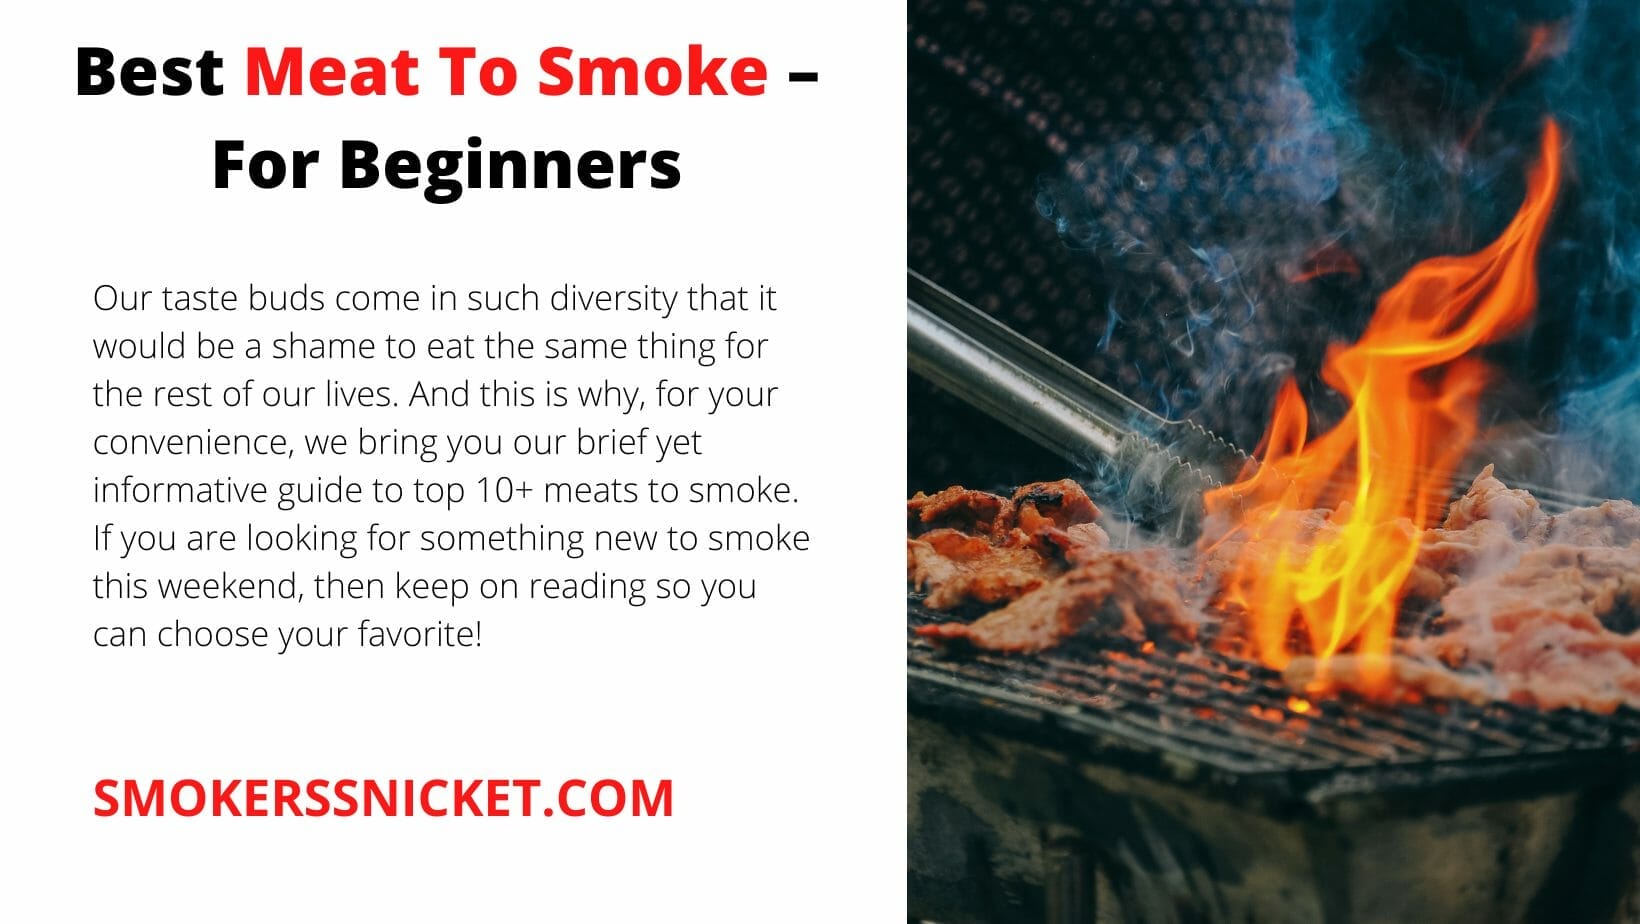 Best Meat to smoker for begginers